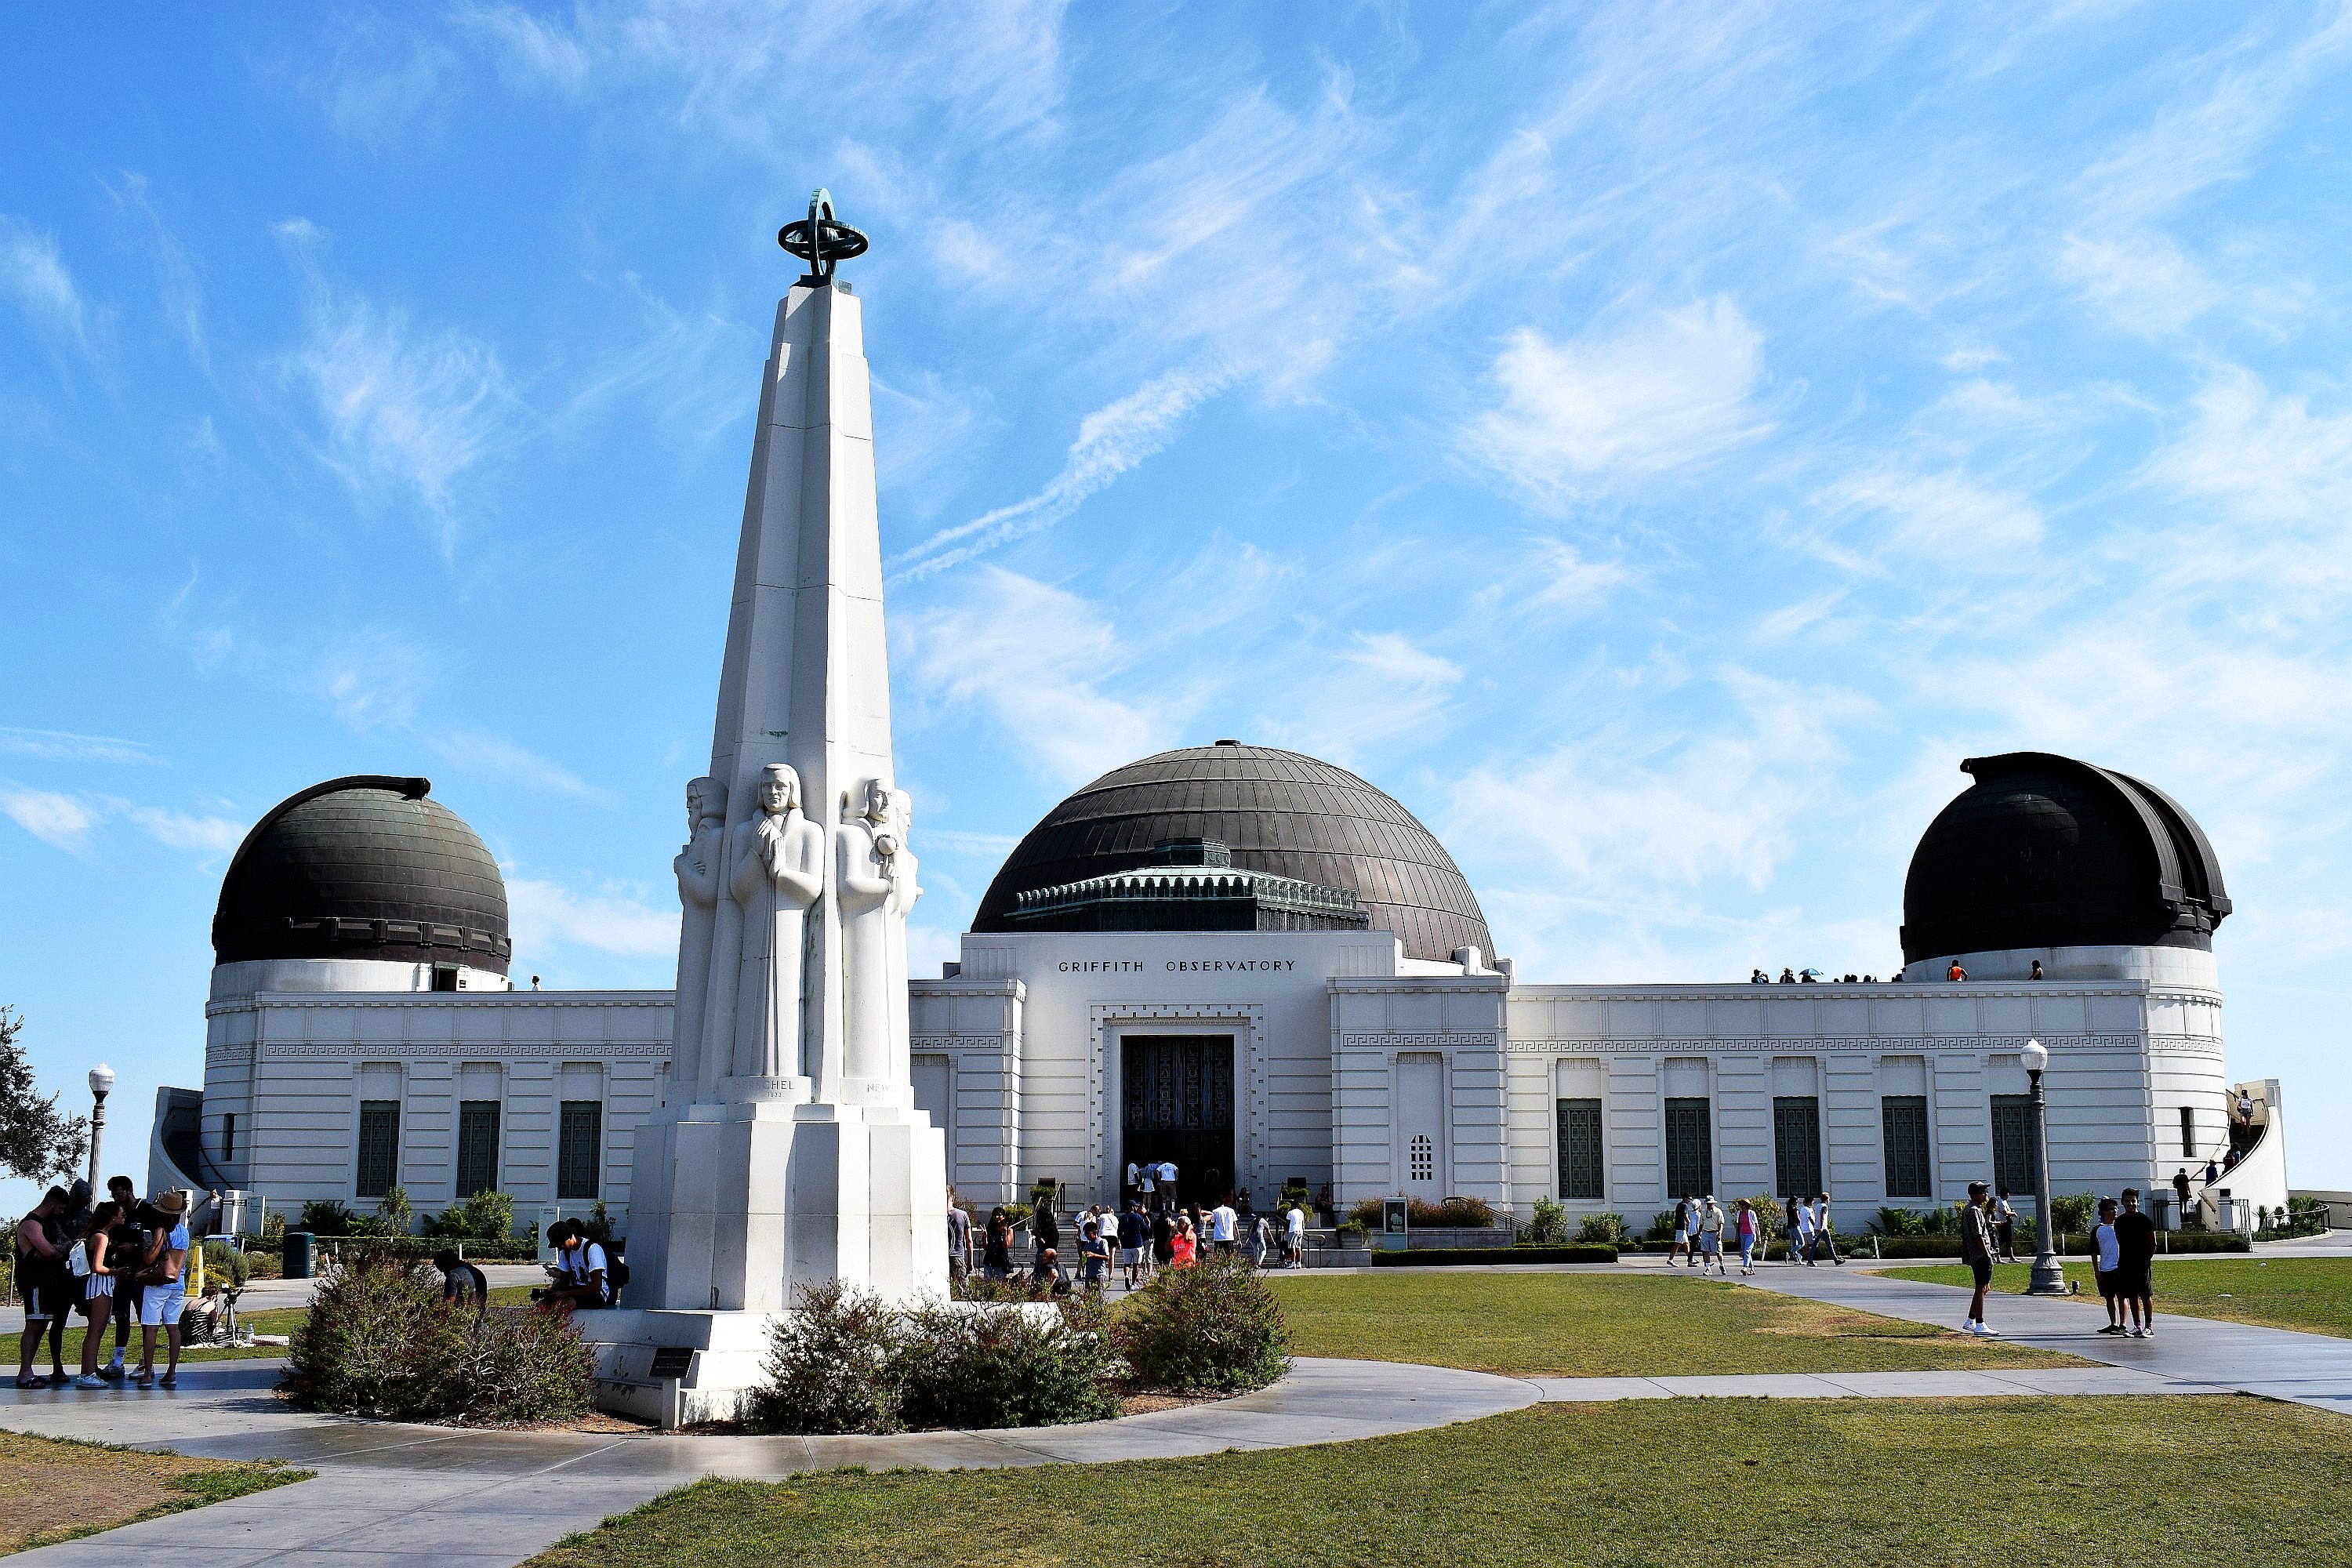 Griffith Observatory, Scientology, Hollywood and other assorted Los Angeles sights